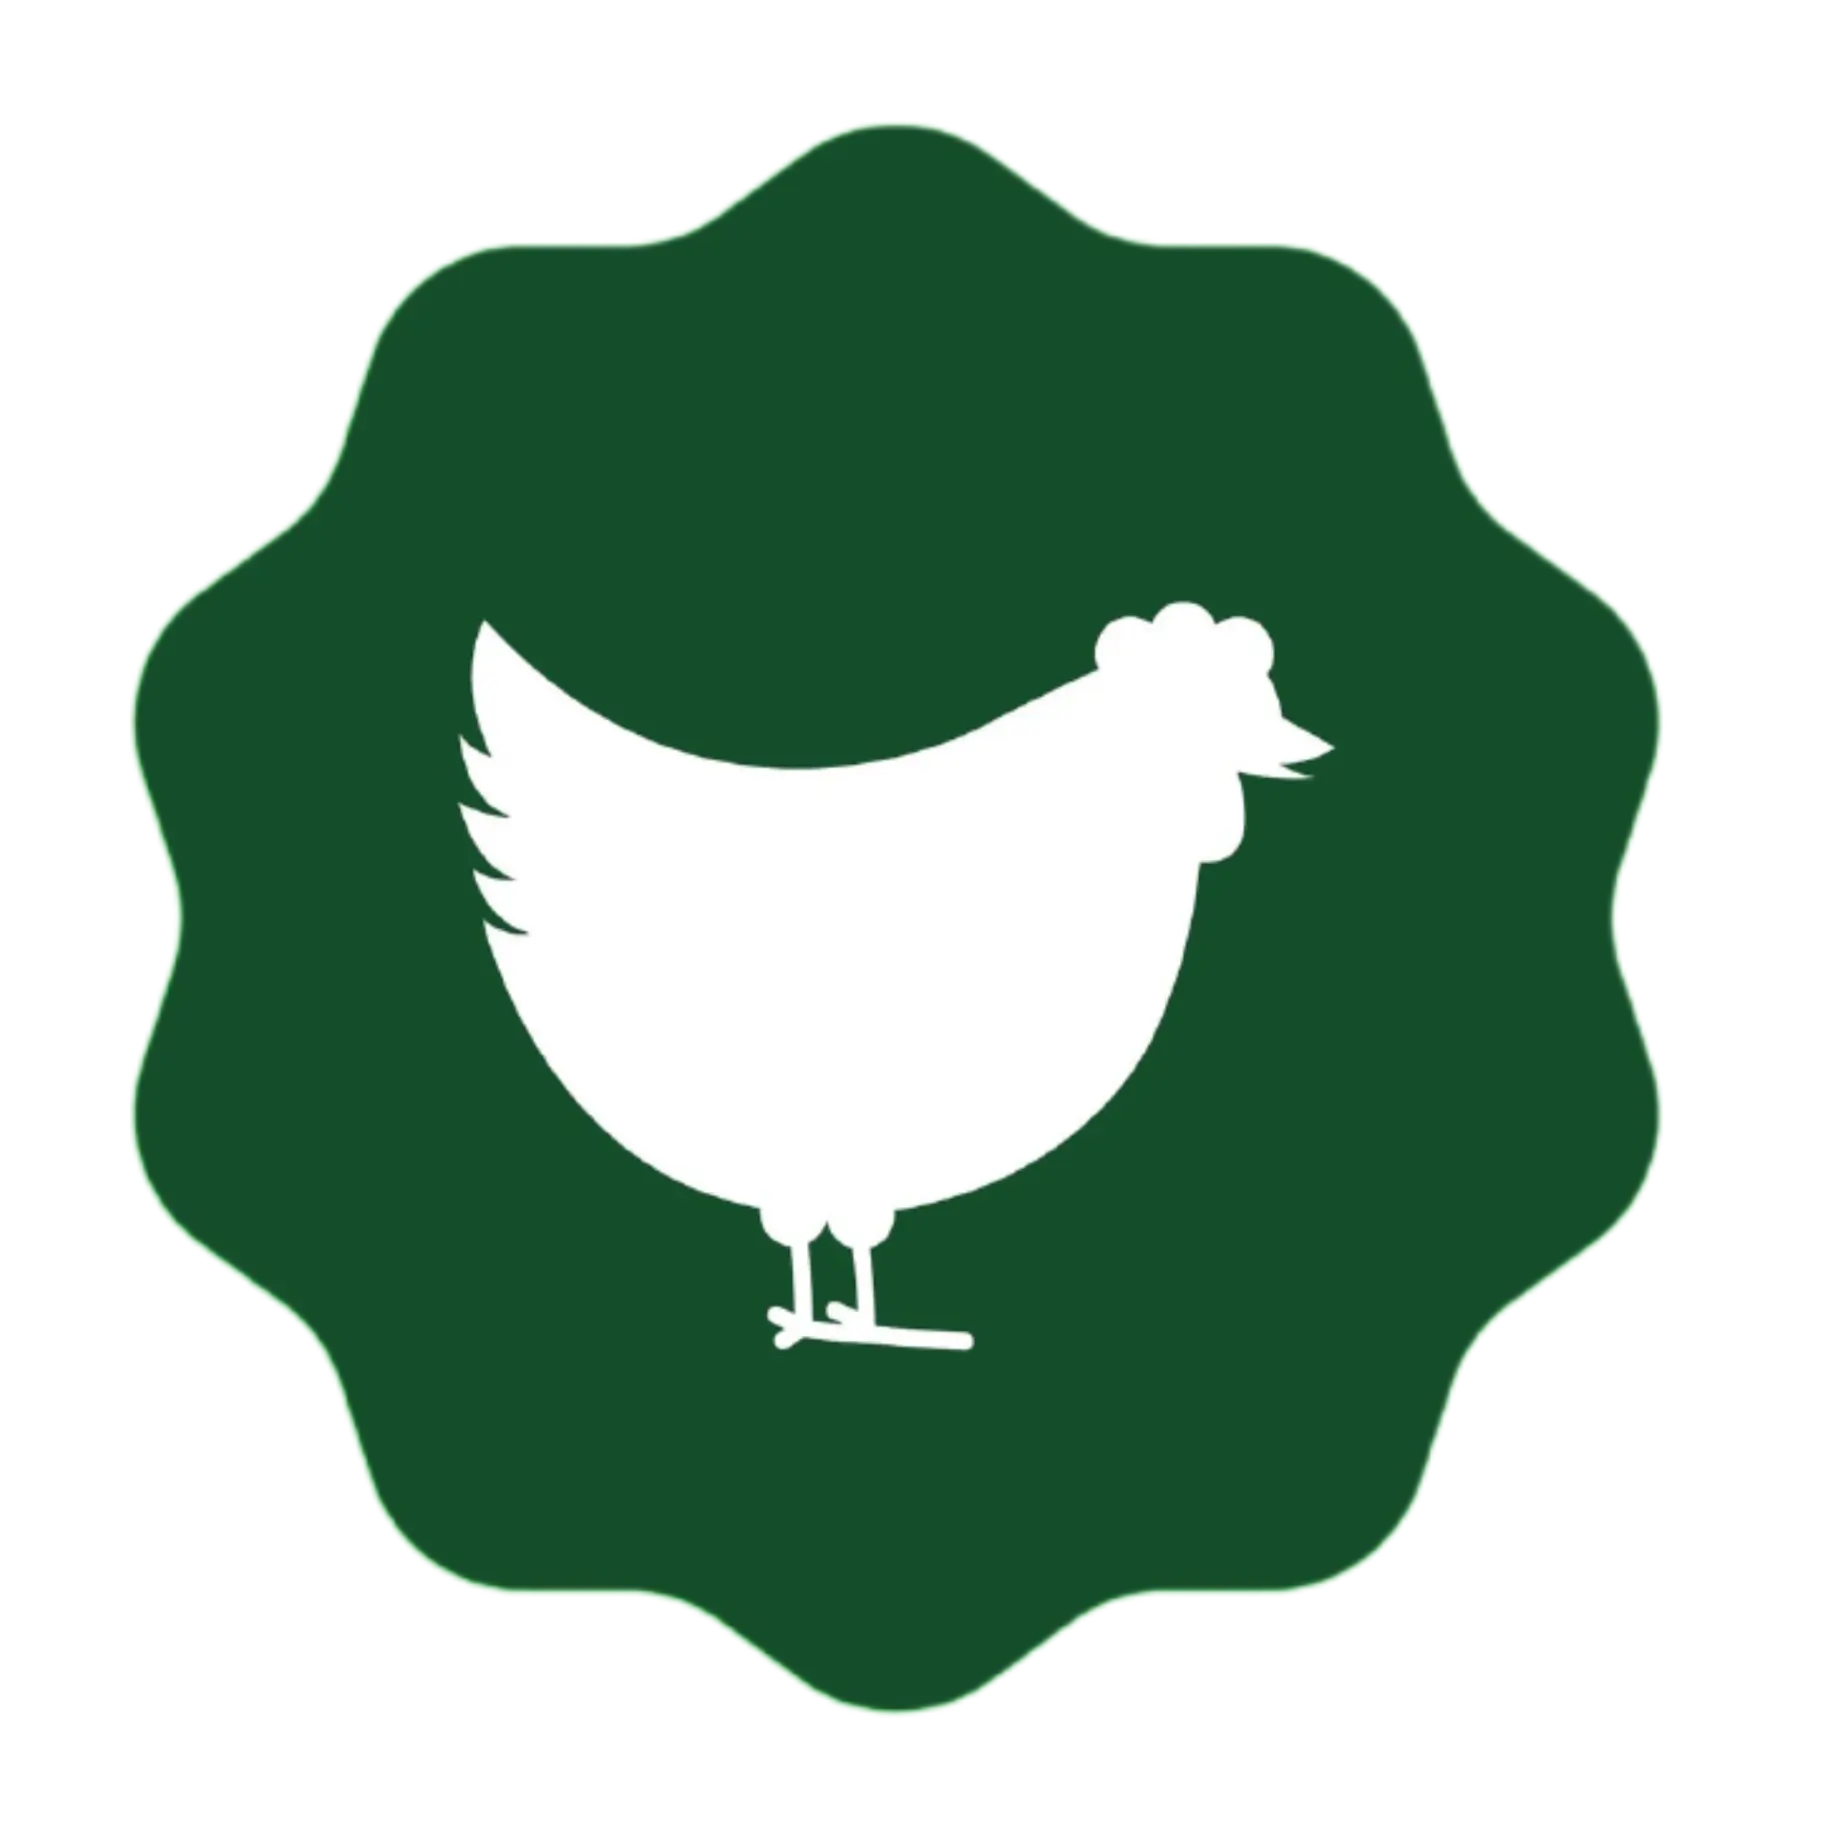 A simple white silhouette of a chicken centered on a dark green, floral-like badge shape with a subtle black-striped background on the right side.